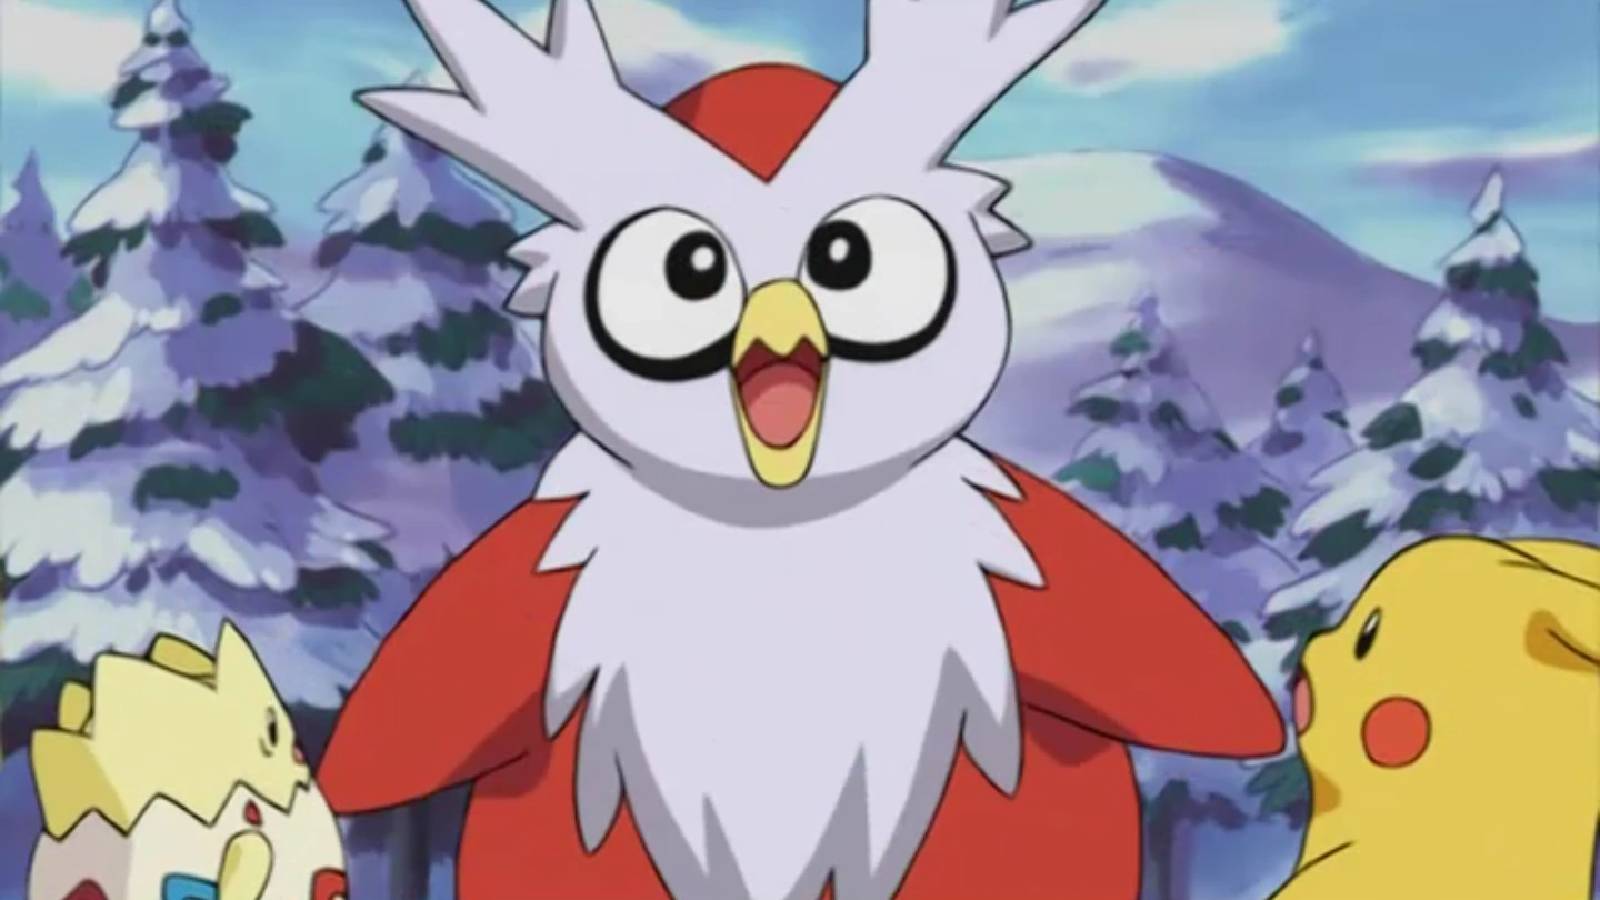 A screenshot from the Pokemon anime shows the gift Pokemon, Delibird